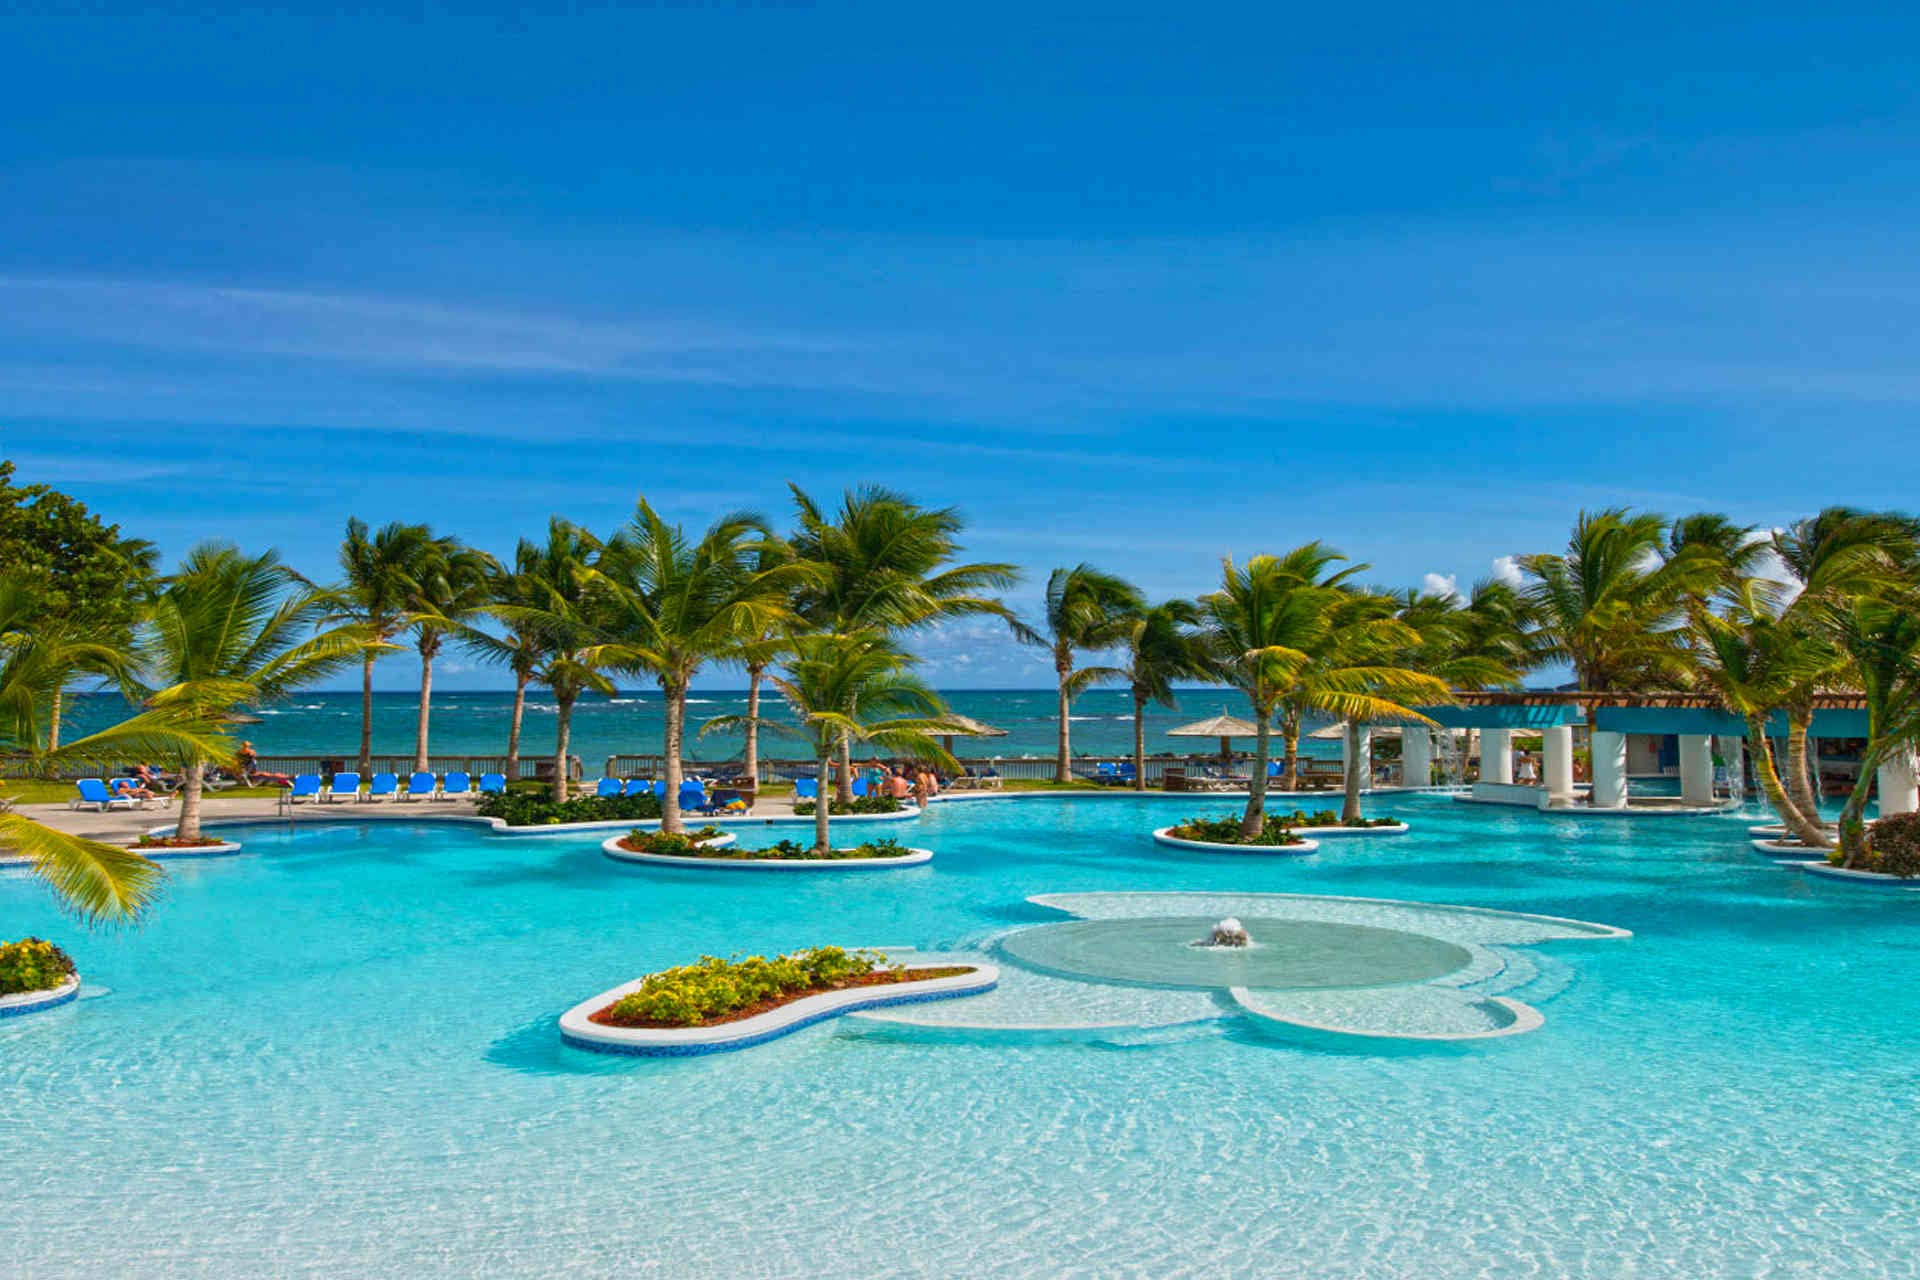 10 Best AllInclusive Caribbean Family Resorts for 2019 